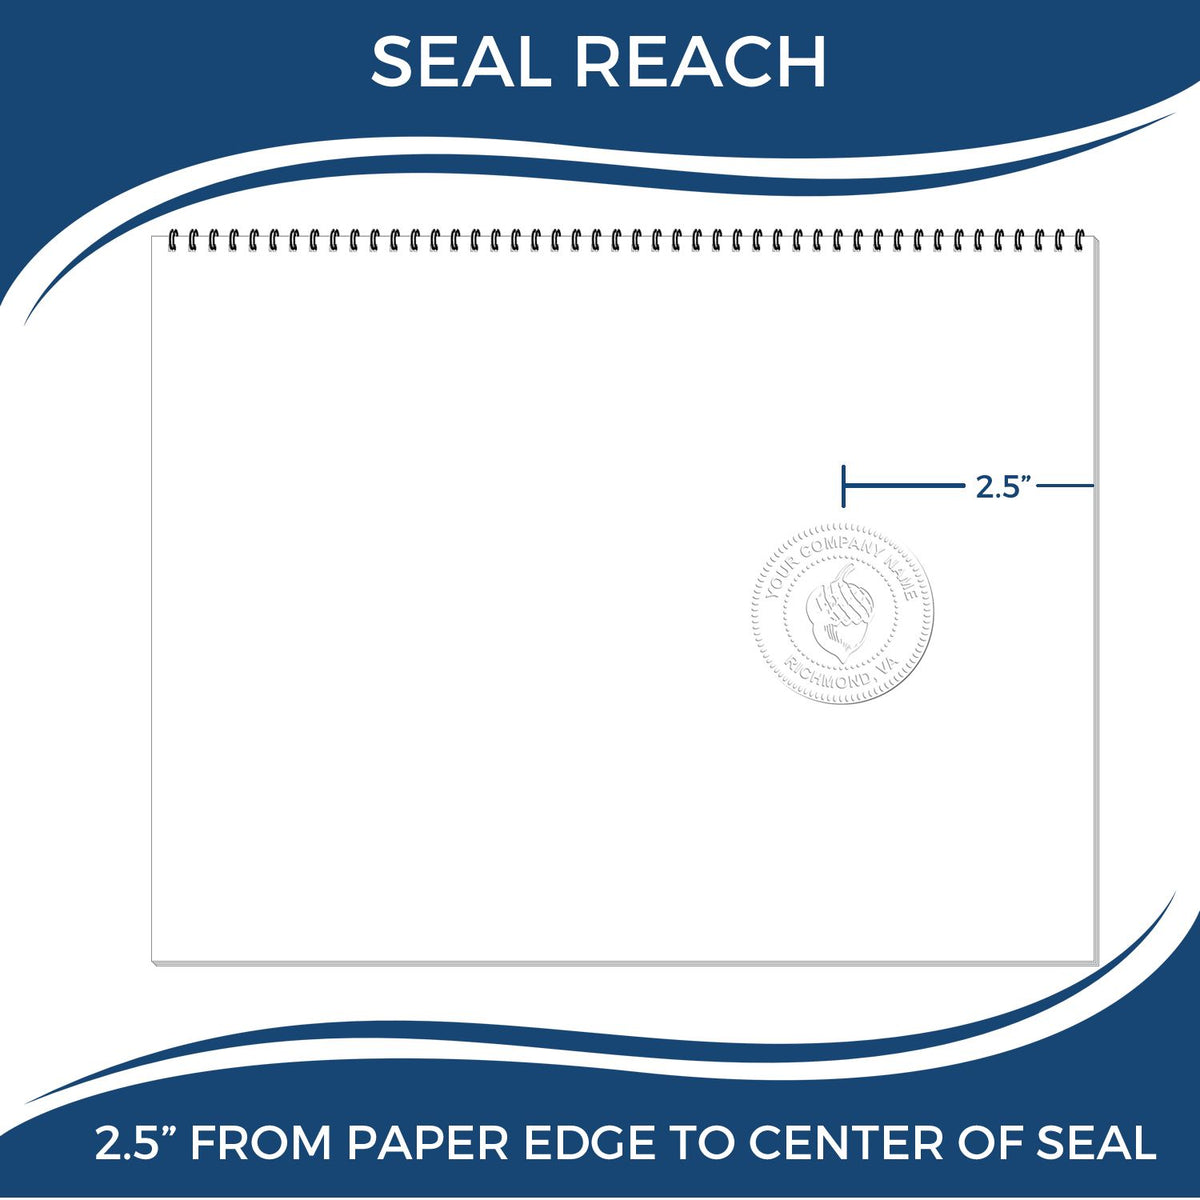 An infographic showing the seal reach which is represented by a ruler and a miniature seal image of the Heavy Duty Cast Iron Guam Engineer Seal Embosser